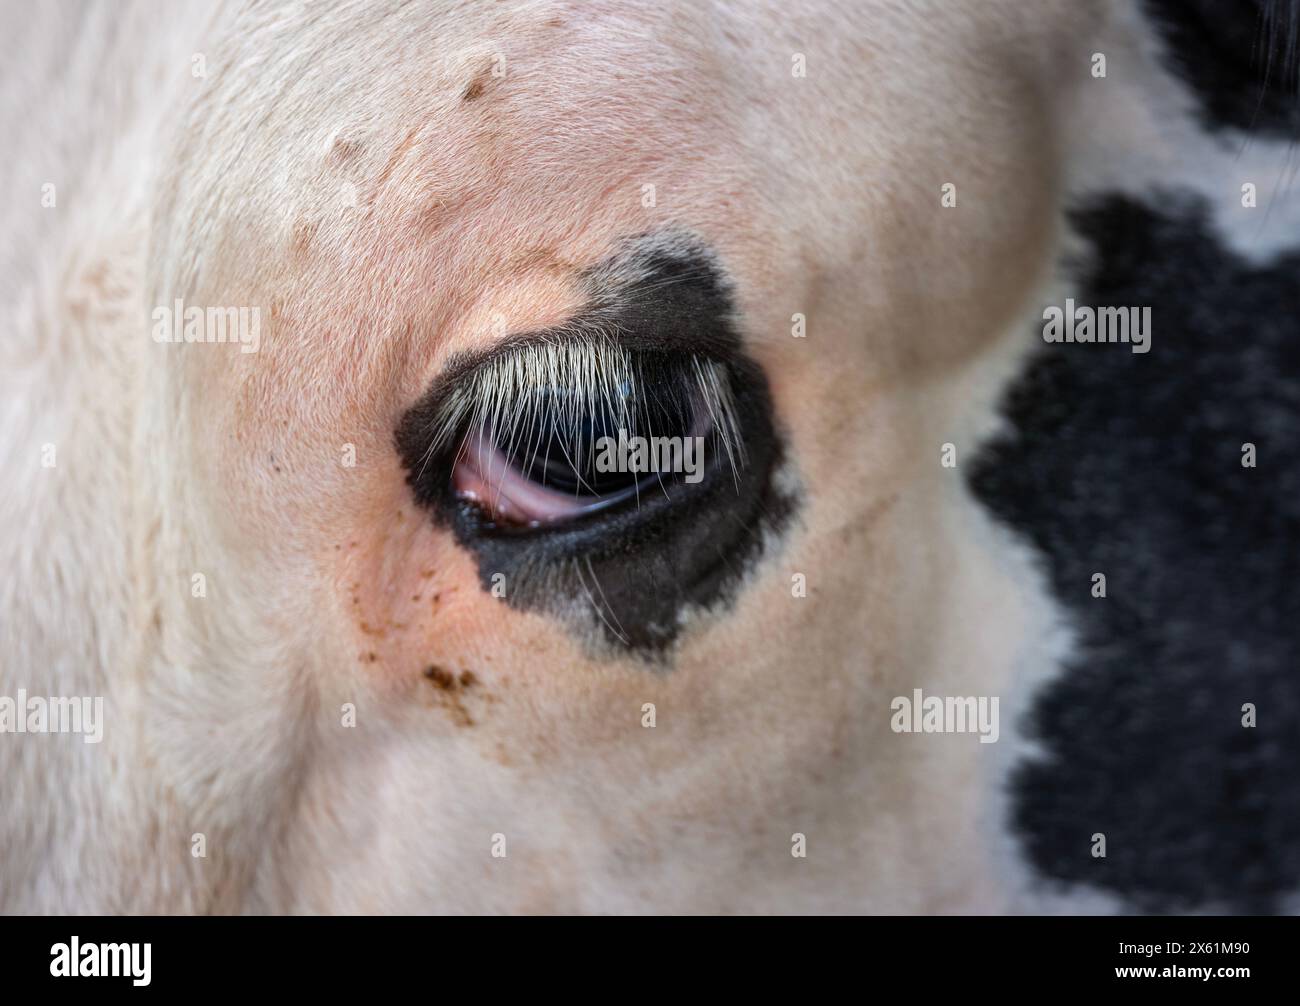 closeup of cow's eye of black and white spotted cow with white eyelashes Stock Photo